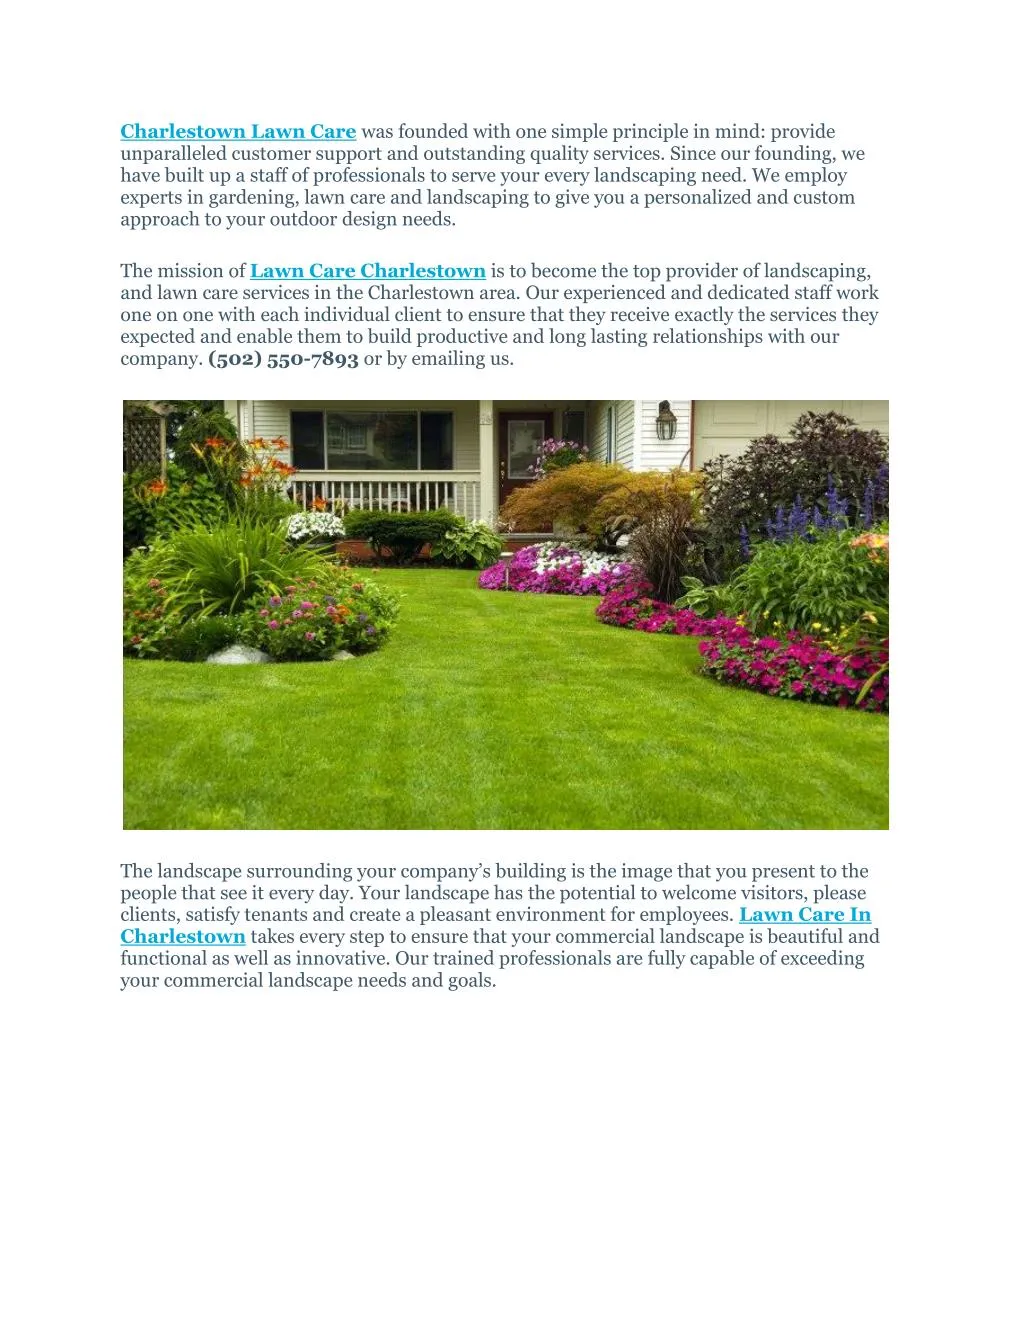 charlestown lawn care was founded with one simple n.